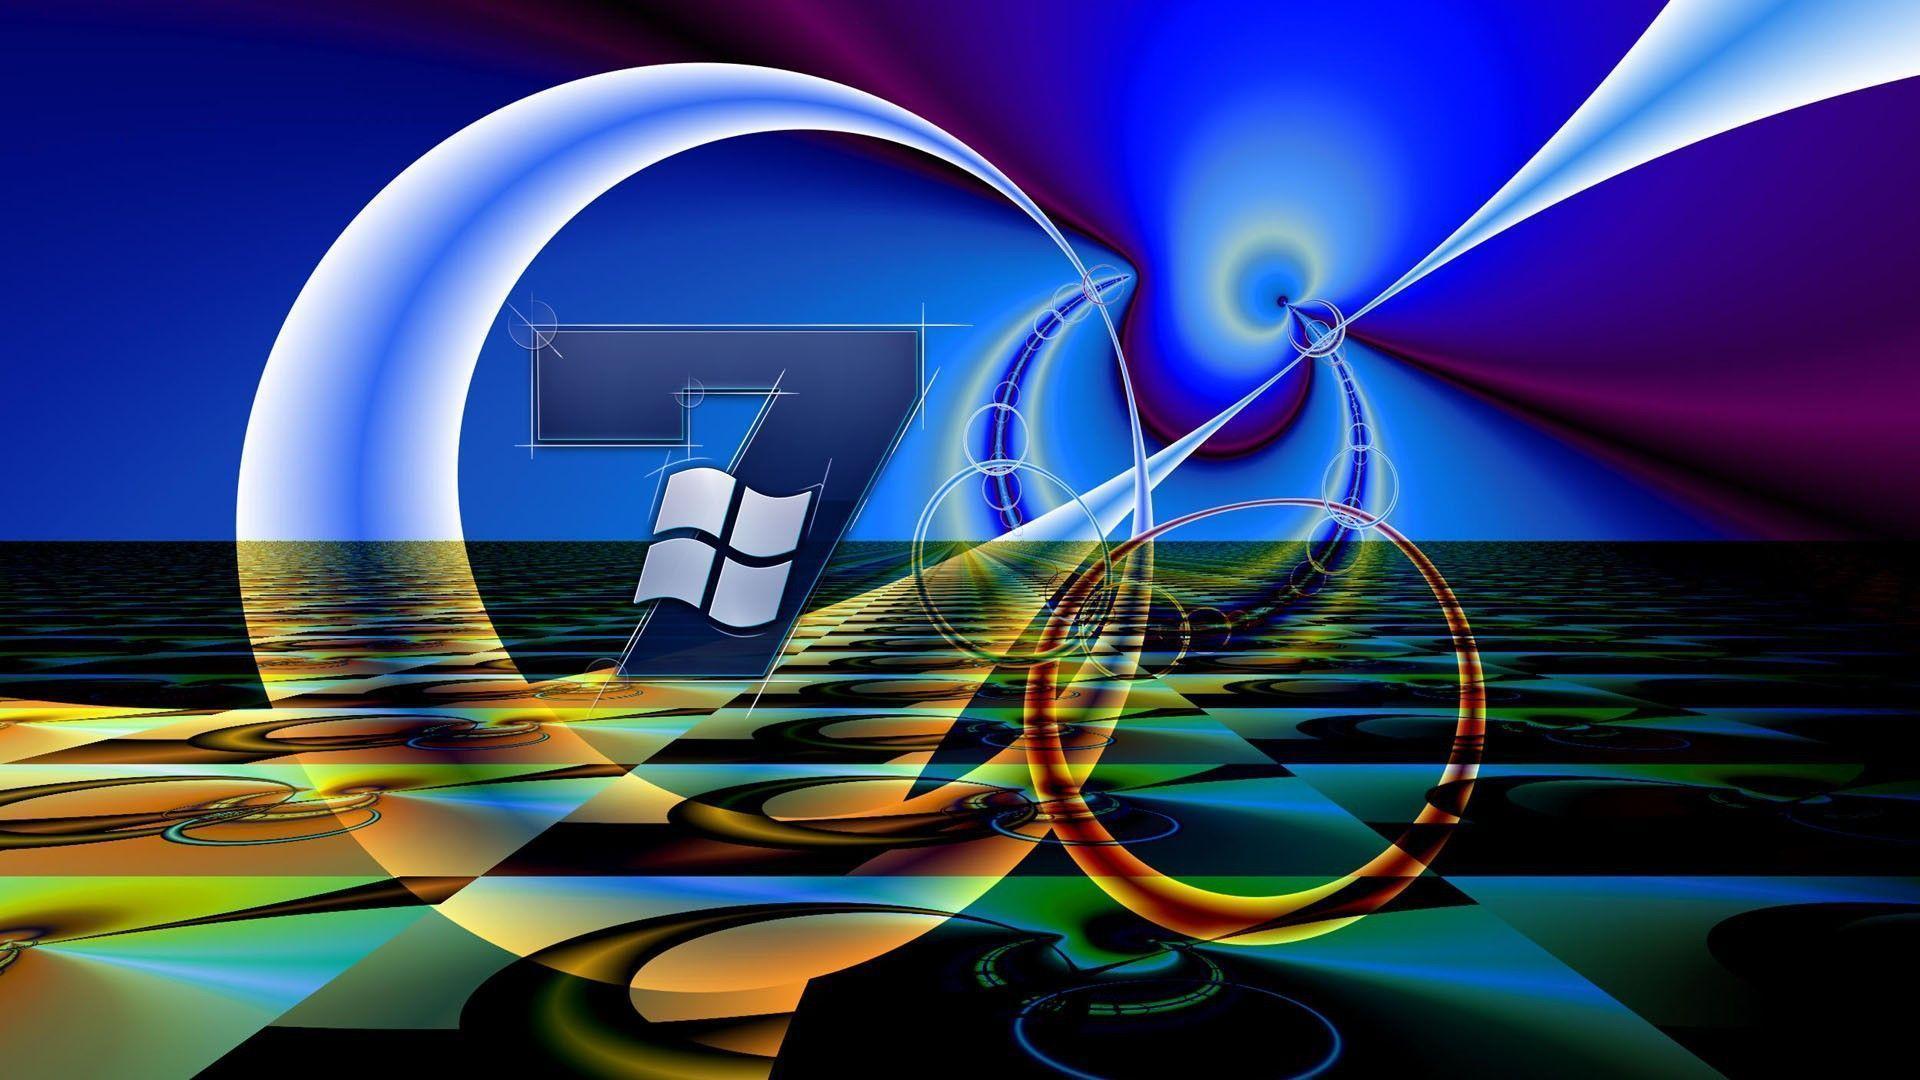 Microsoft Windows 7 wallpaper and image, picture